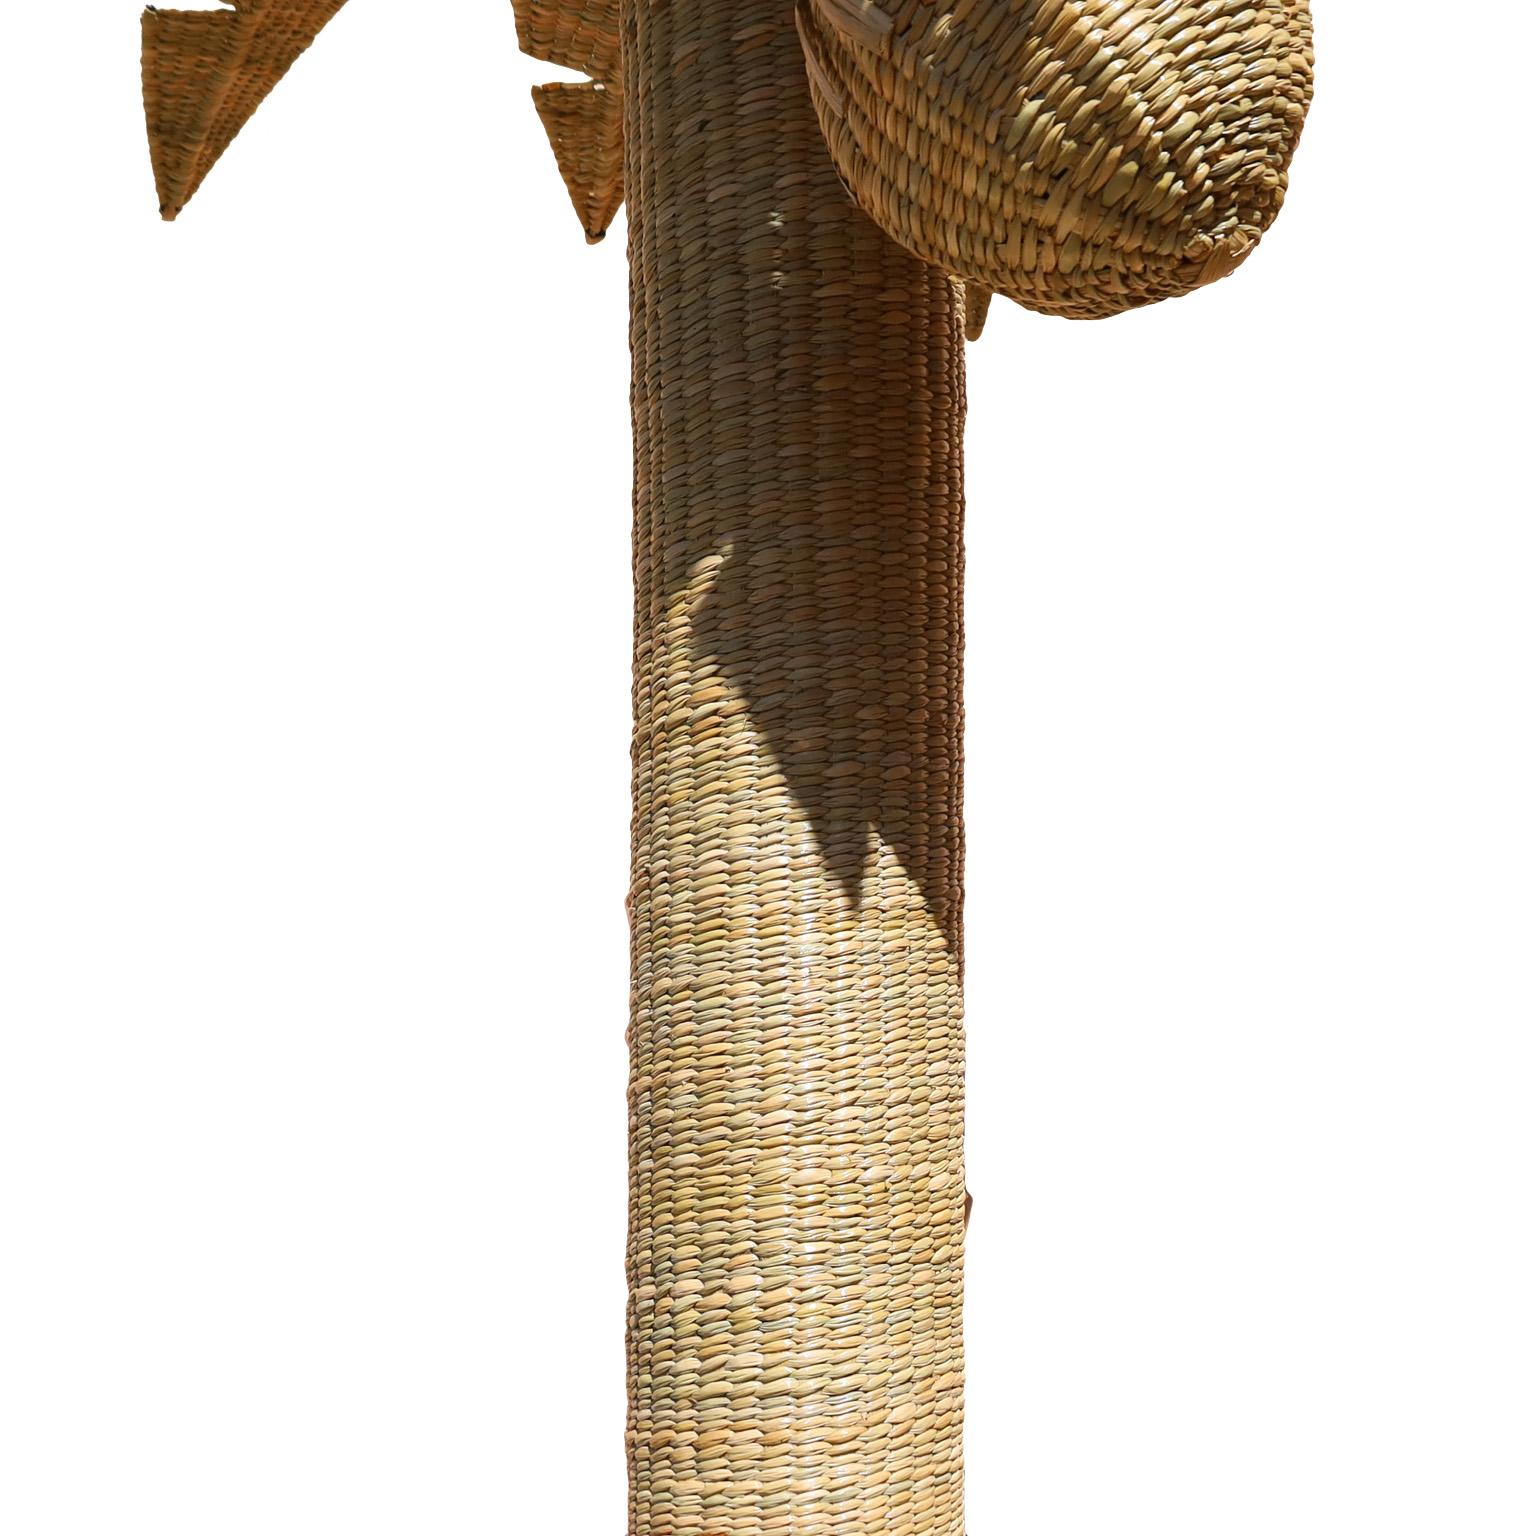 Hand-Woven Life Size Wicker Palm Tree Sculpture from the FS Flores Collection For Sale